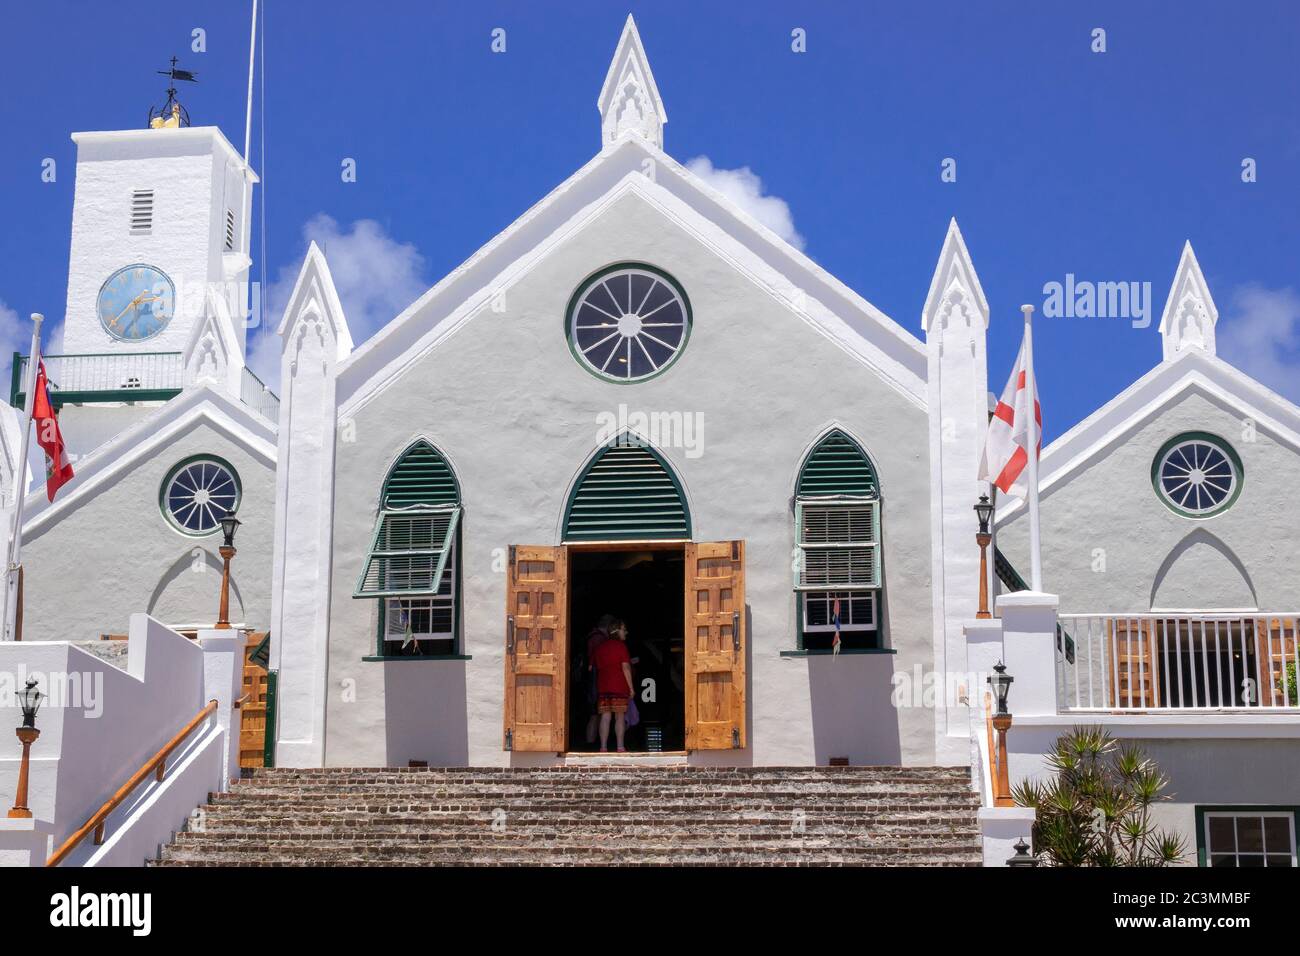 Their Majesties Chappell St. Peter's Anglican Church In The Historic Town Of St. George's Bermuda A UNESCO World Heritage Site Stock Photo